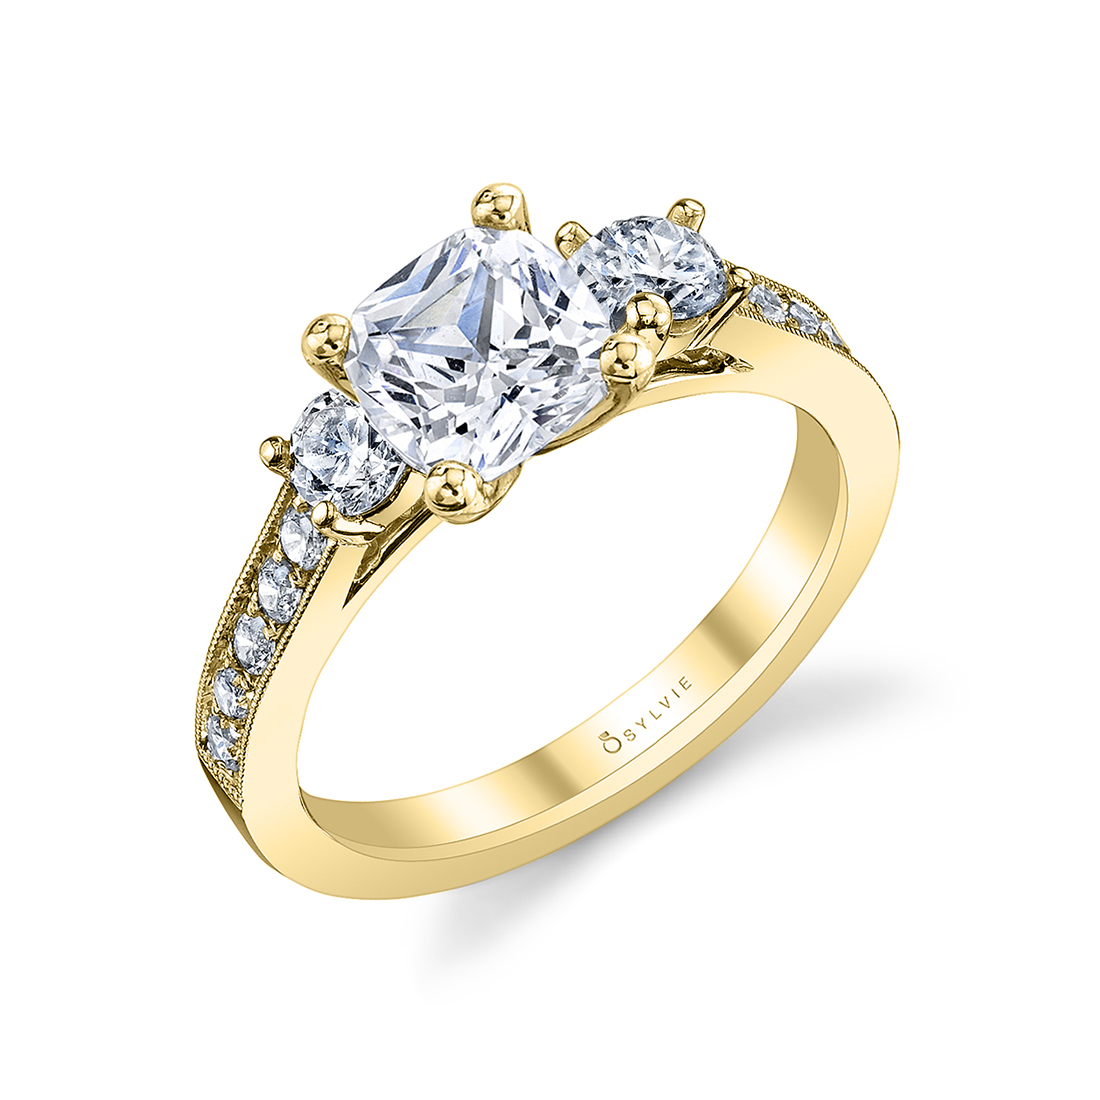 cushion cut 3 stone engagement ring in yellow gold